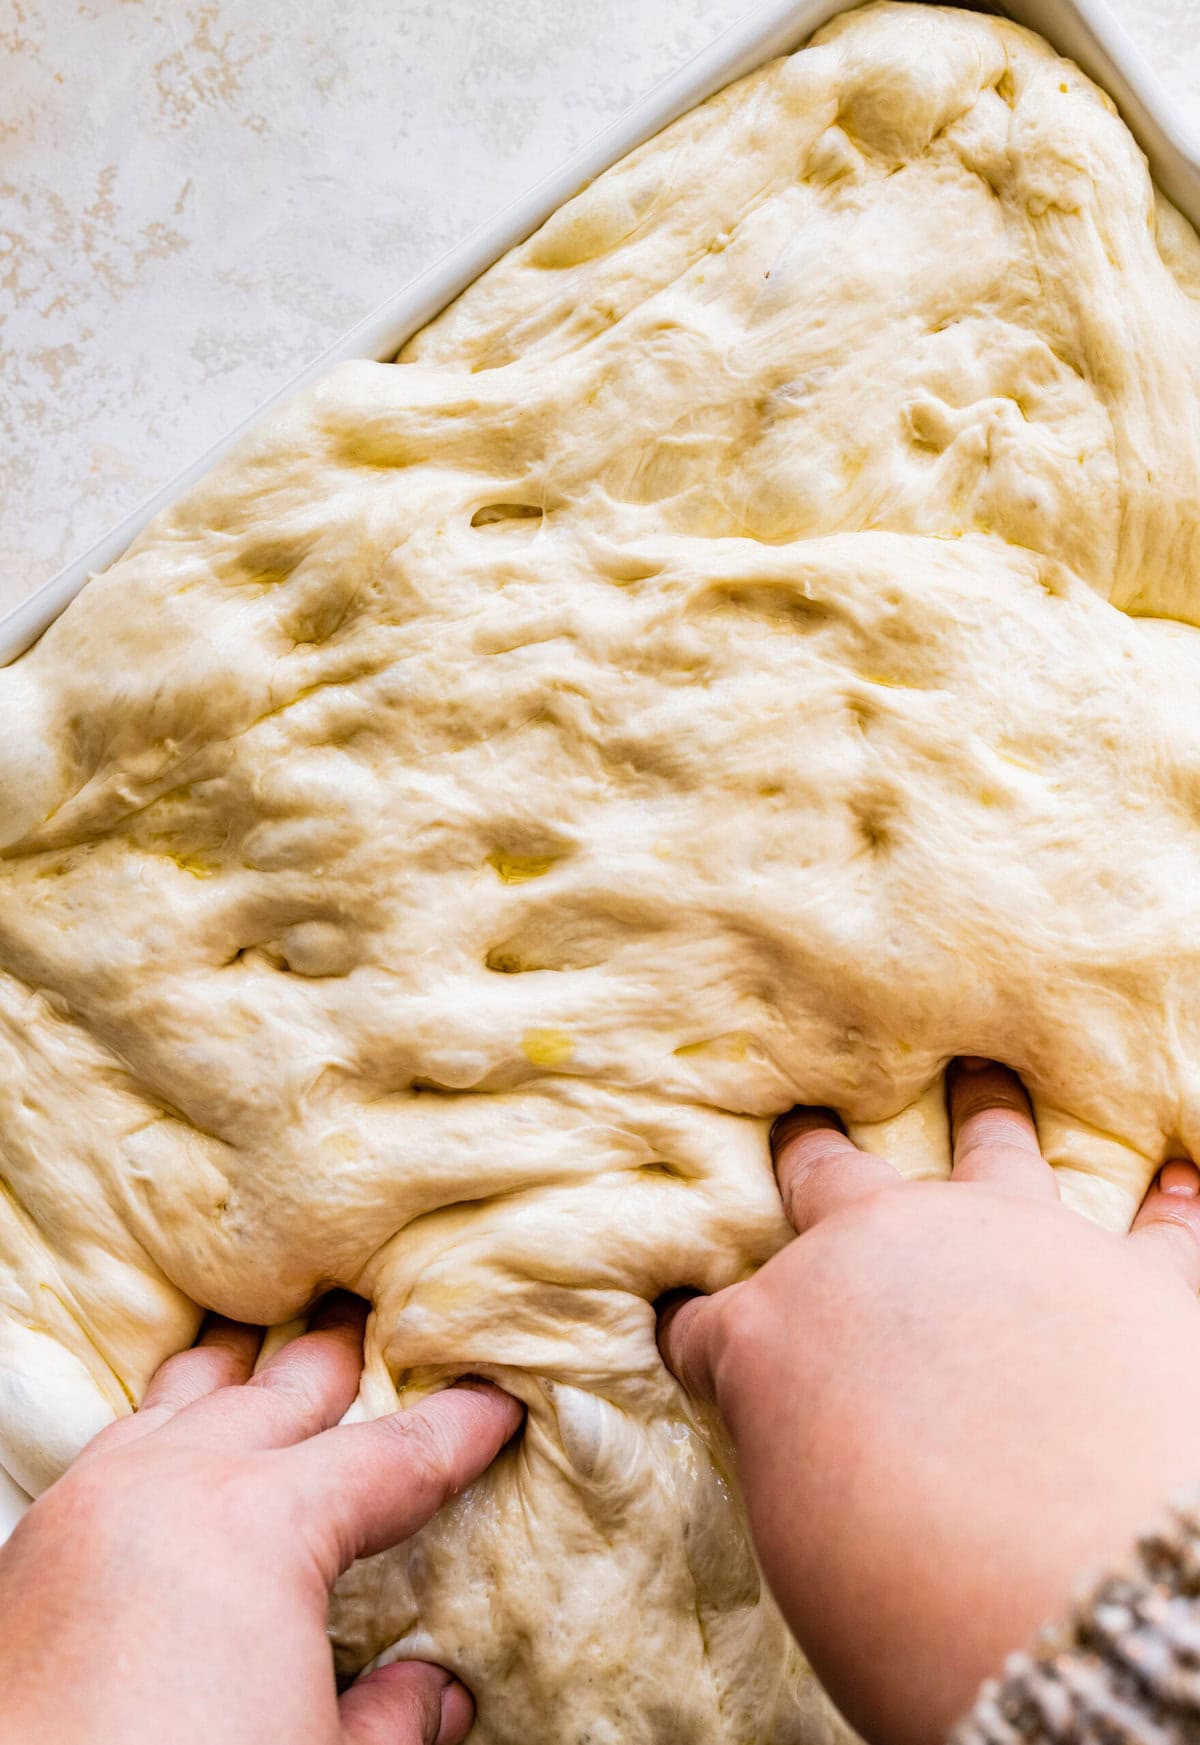 how to make no-knead focaccia bread step-by-step: with your hands make dimples with your fingers after the second rise.